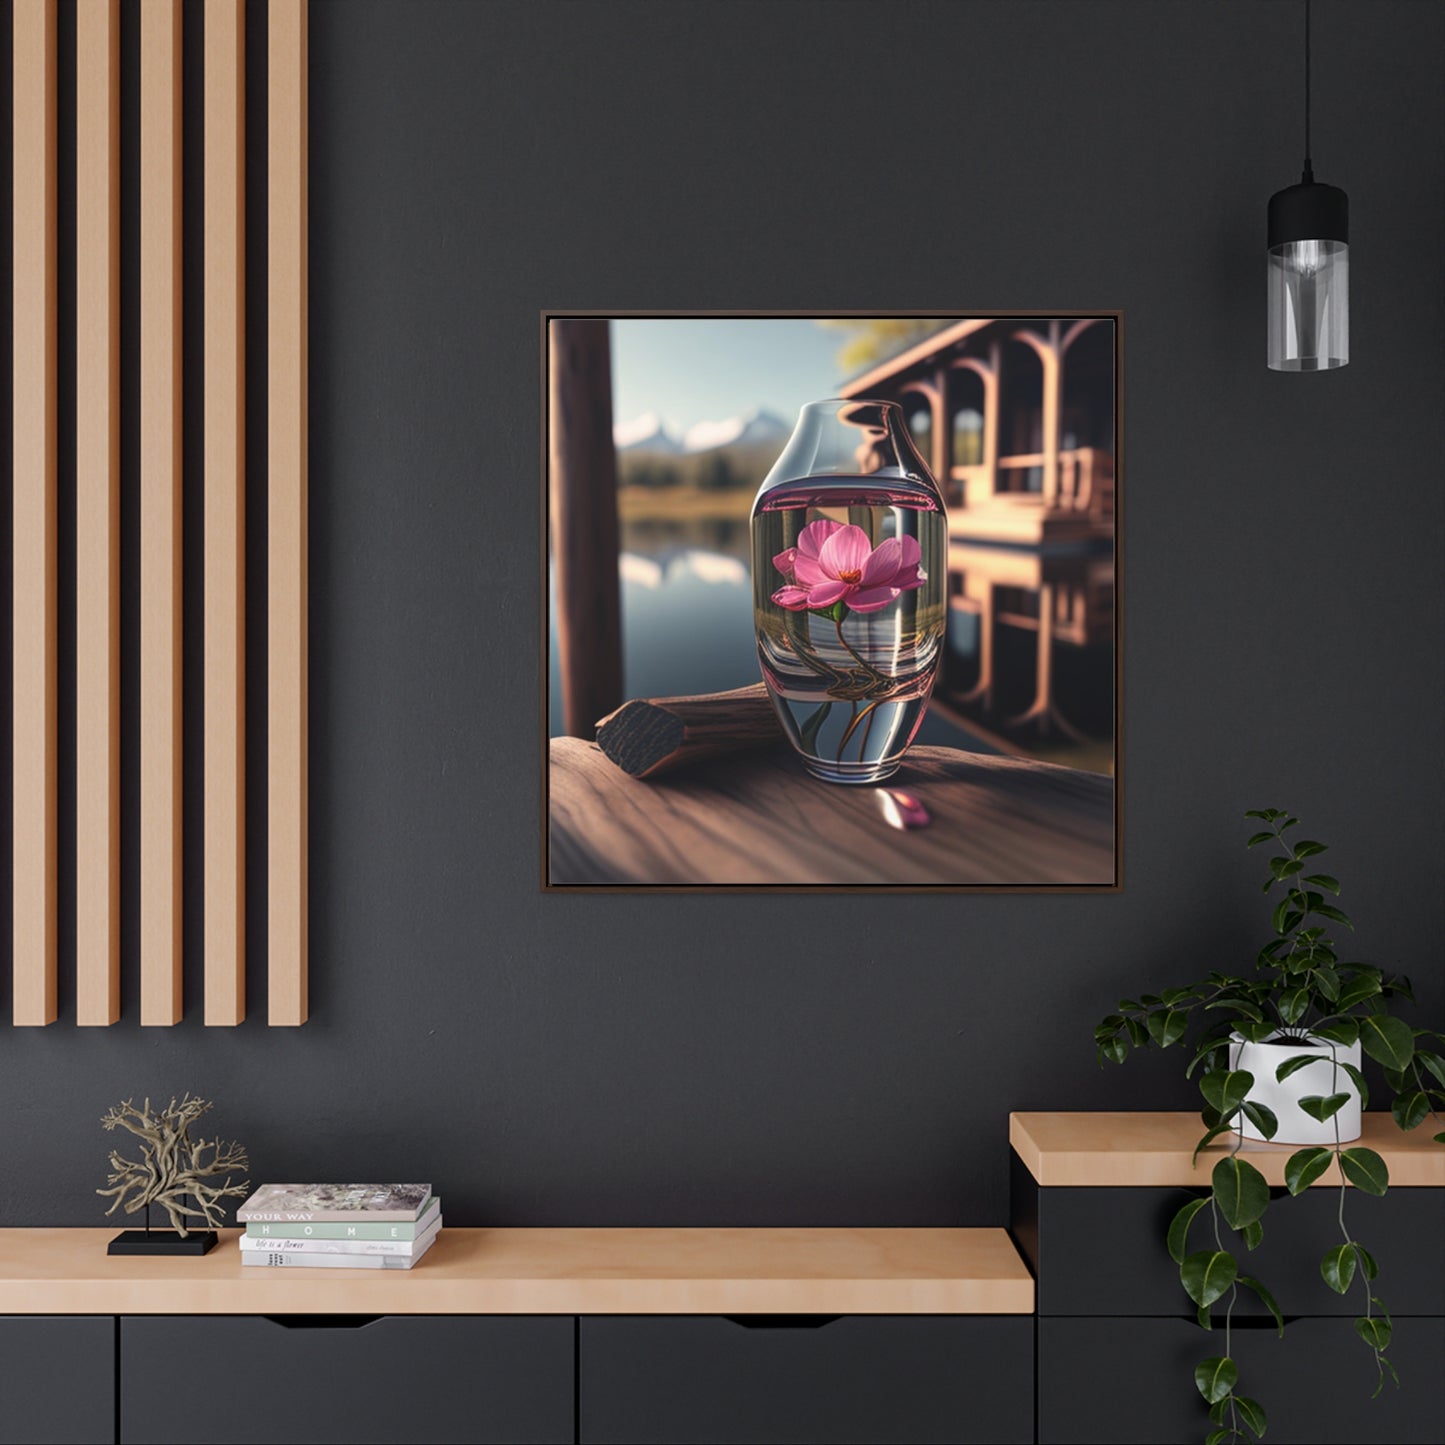 Gallery Canvas Wraps, Square Frame Pink Magnolia 3